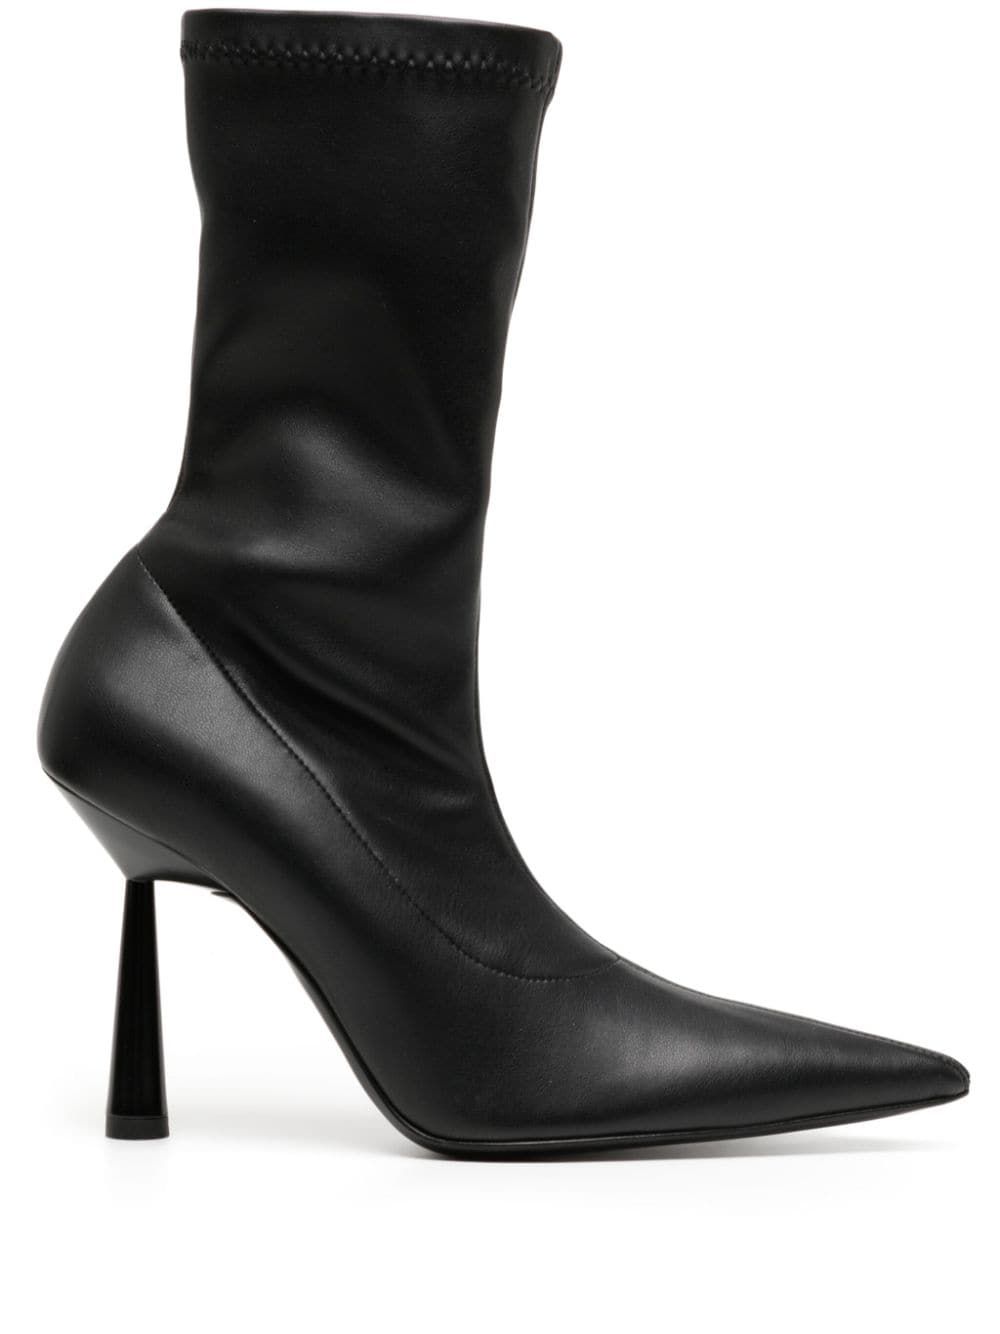 Barthelise 100mm leather boots | Farfetch Global